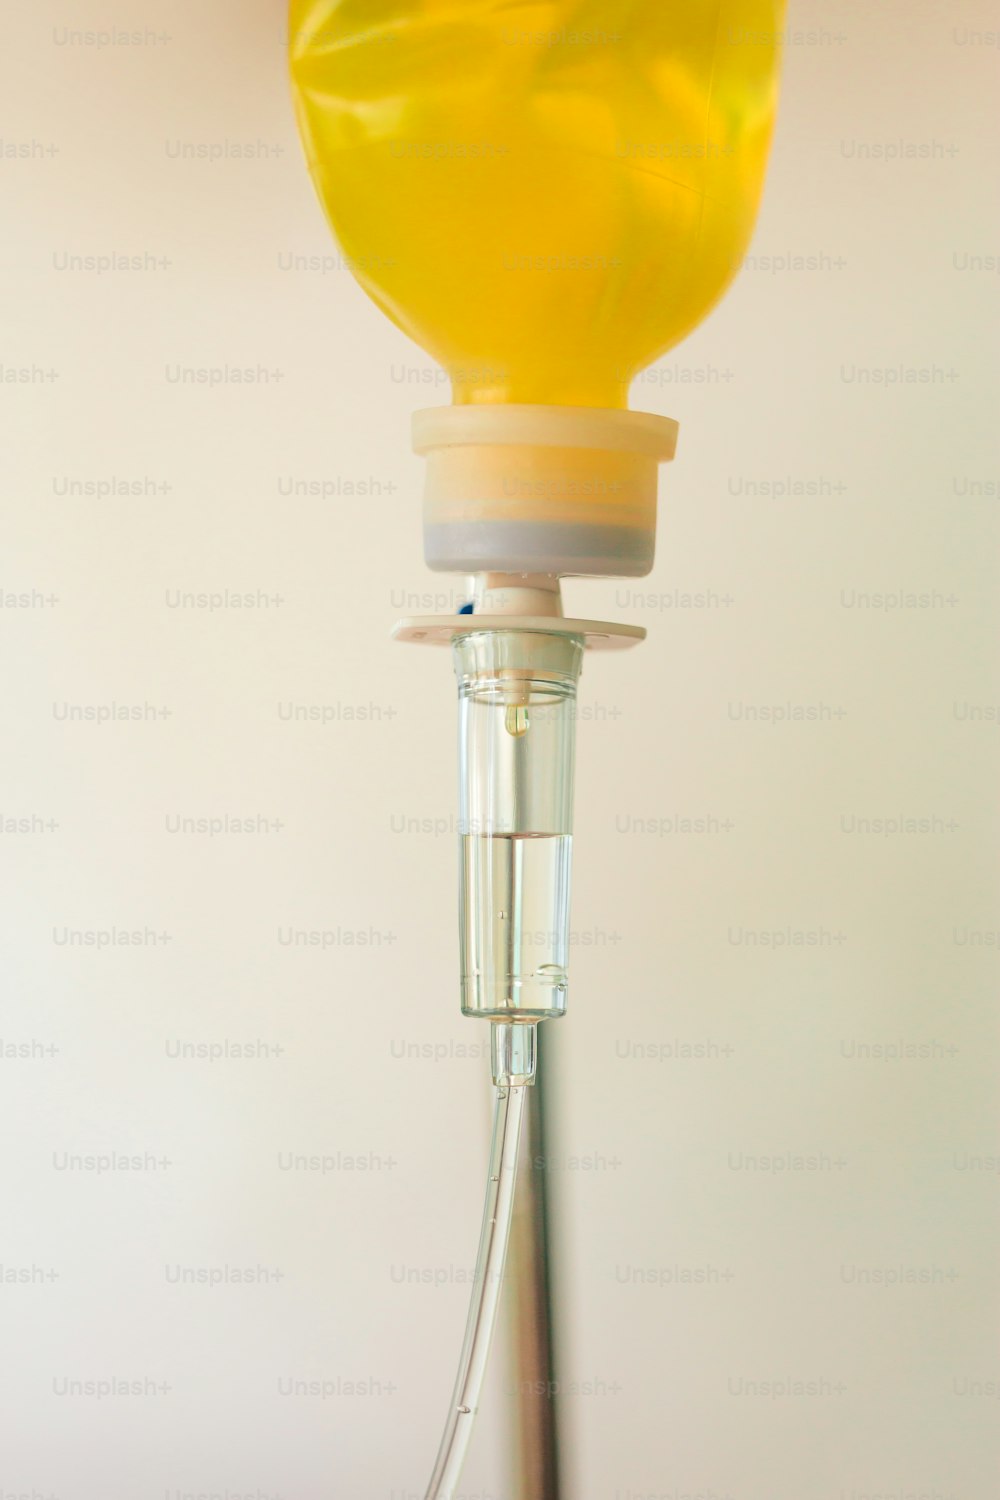 a close up of a yellow light bulb